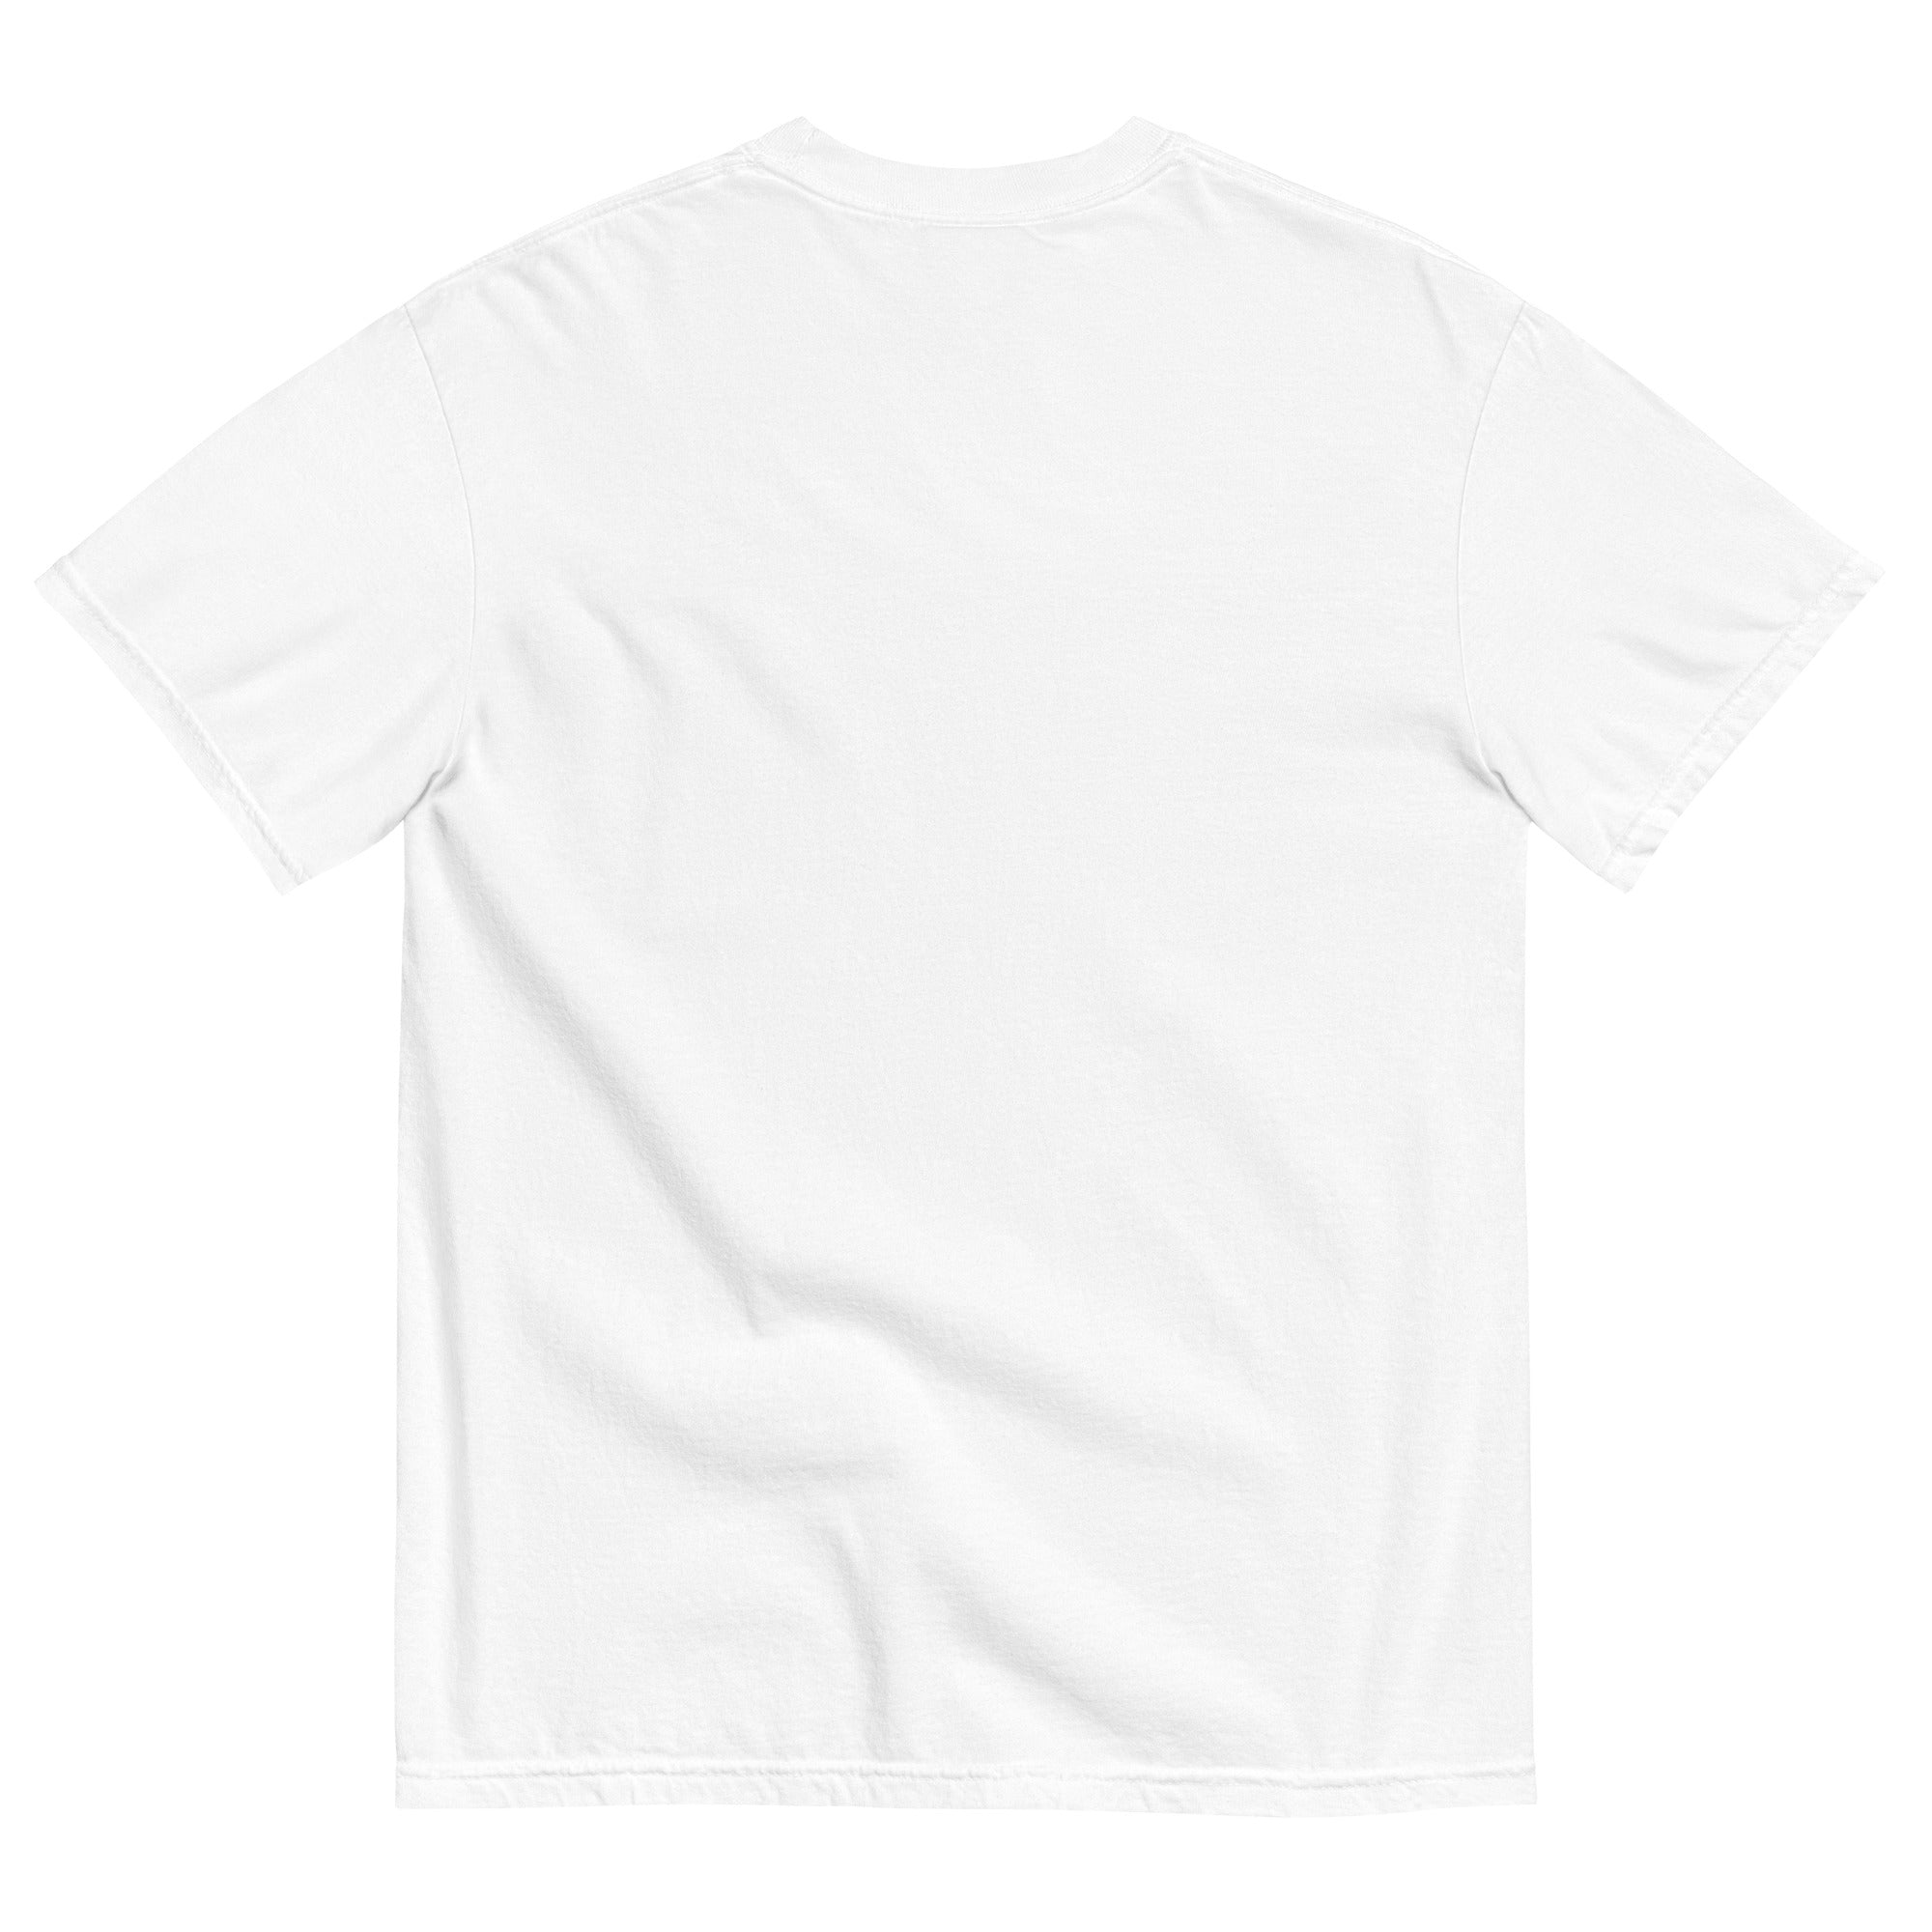 Vintage Relaxed Fit T-Shirt - New Orleans, LA